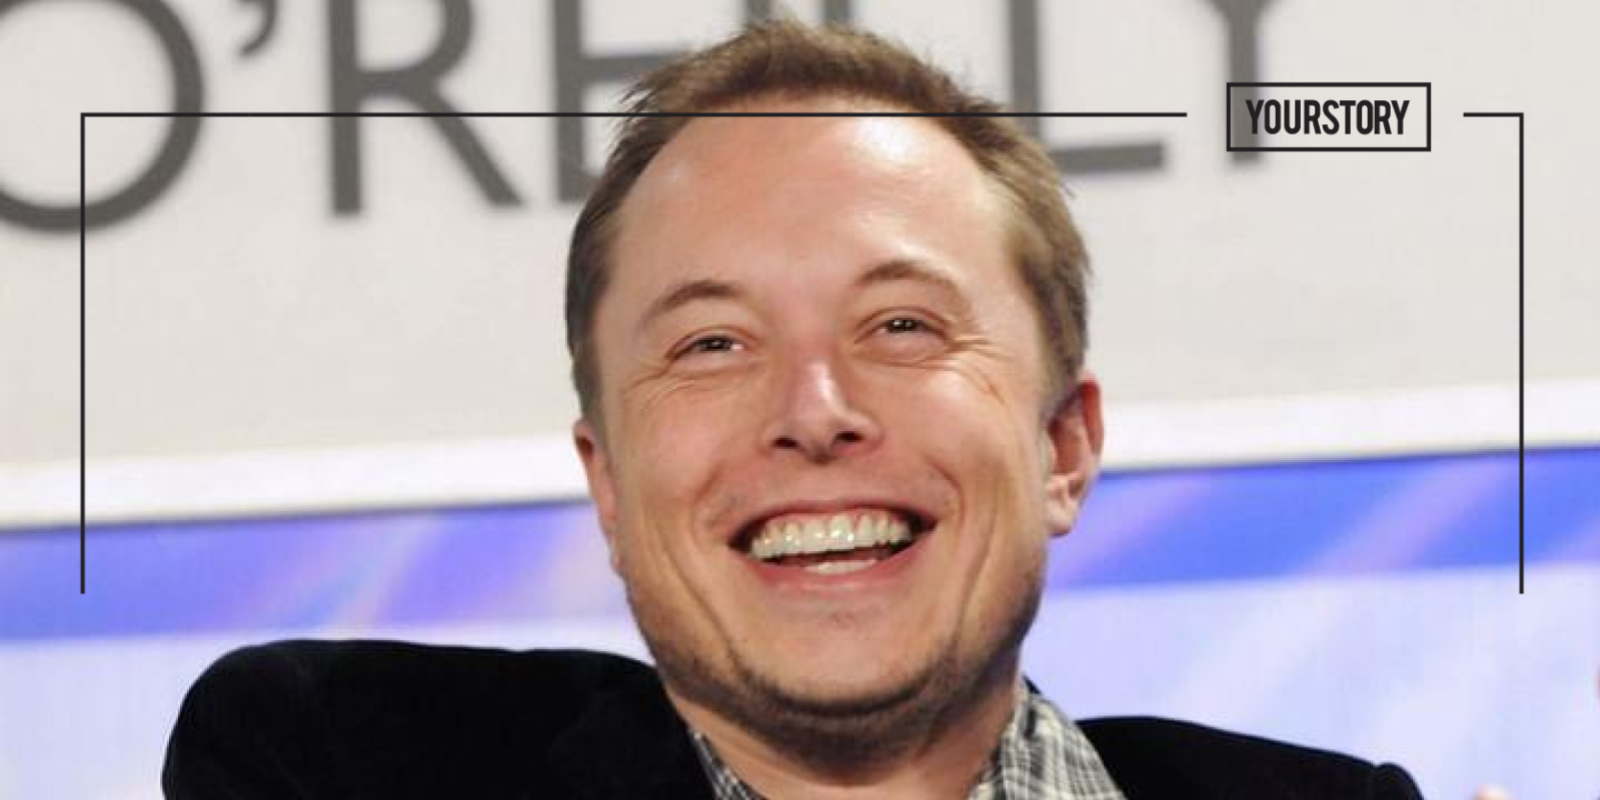 2 percent of Elon Musk’s wealth could solve world hunger problems, says UN; Musk tweets he'll sell Tesla stock if UN can prove it